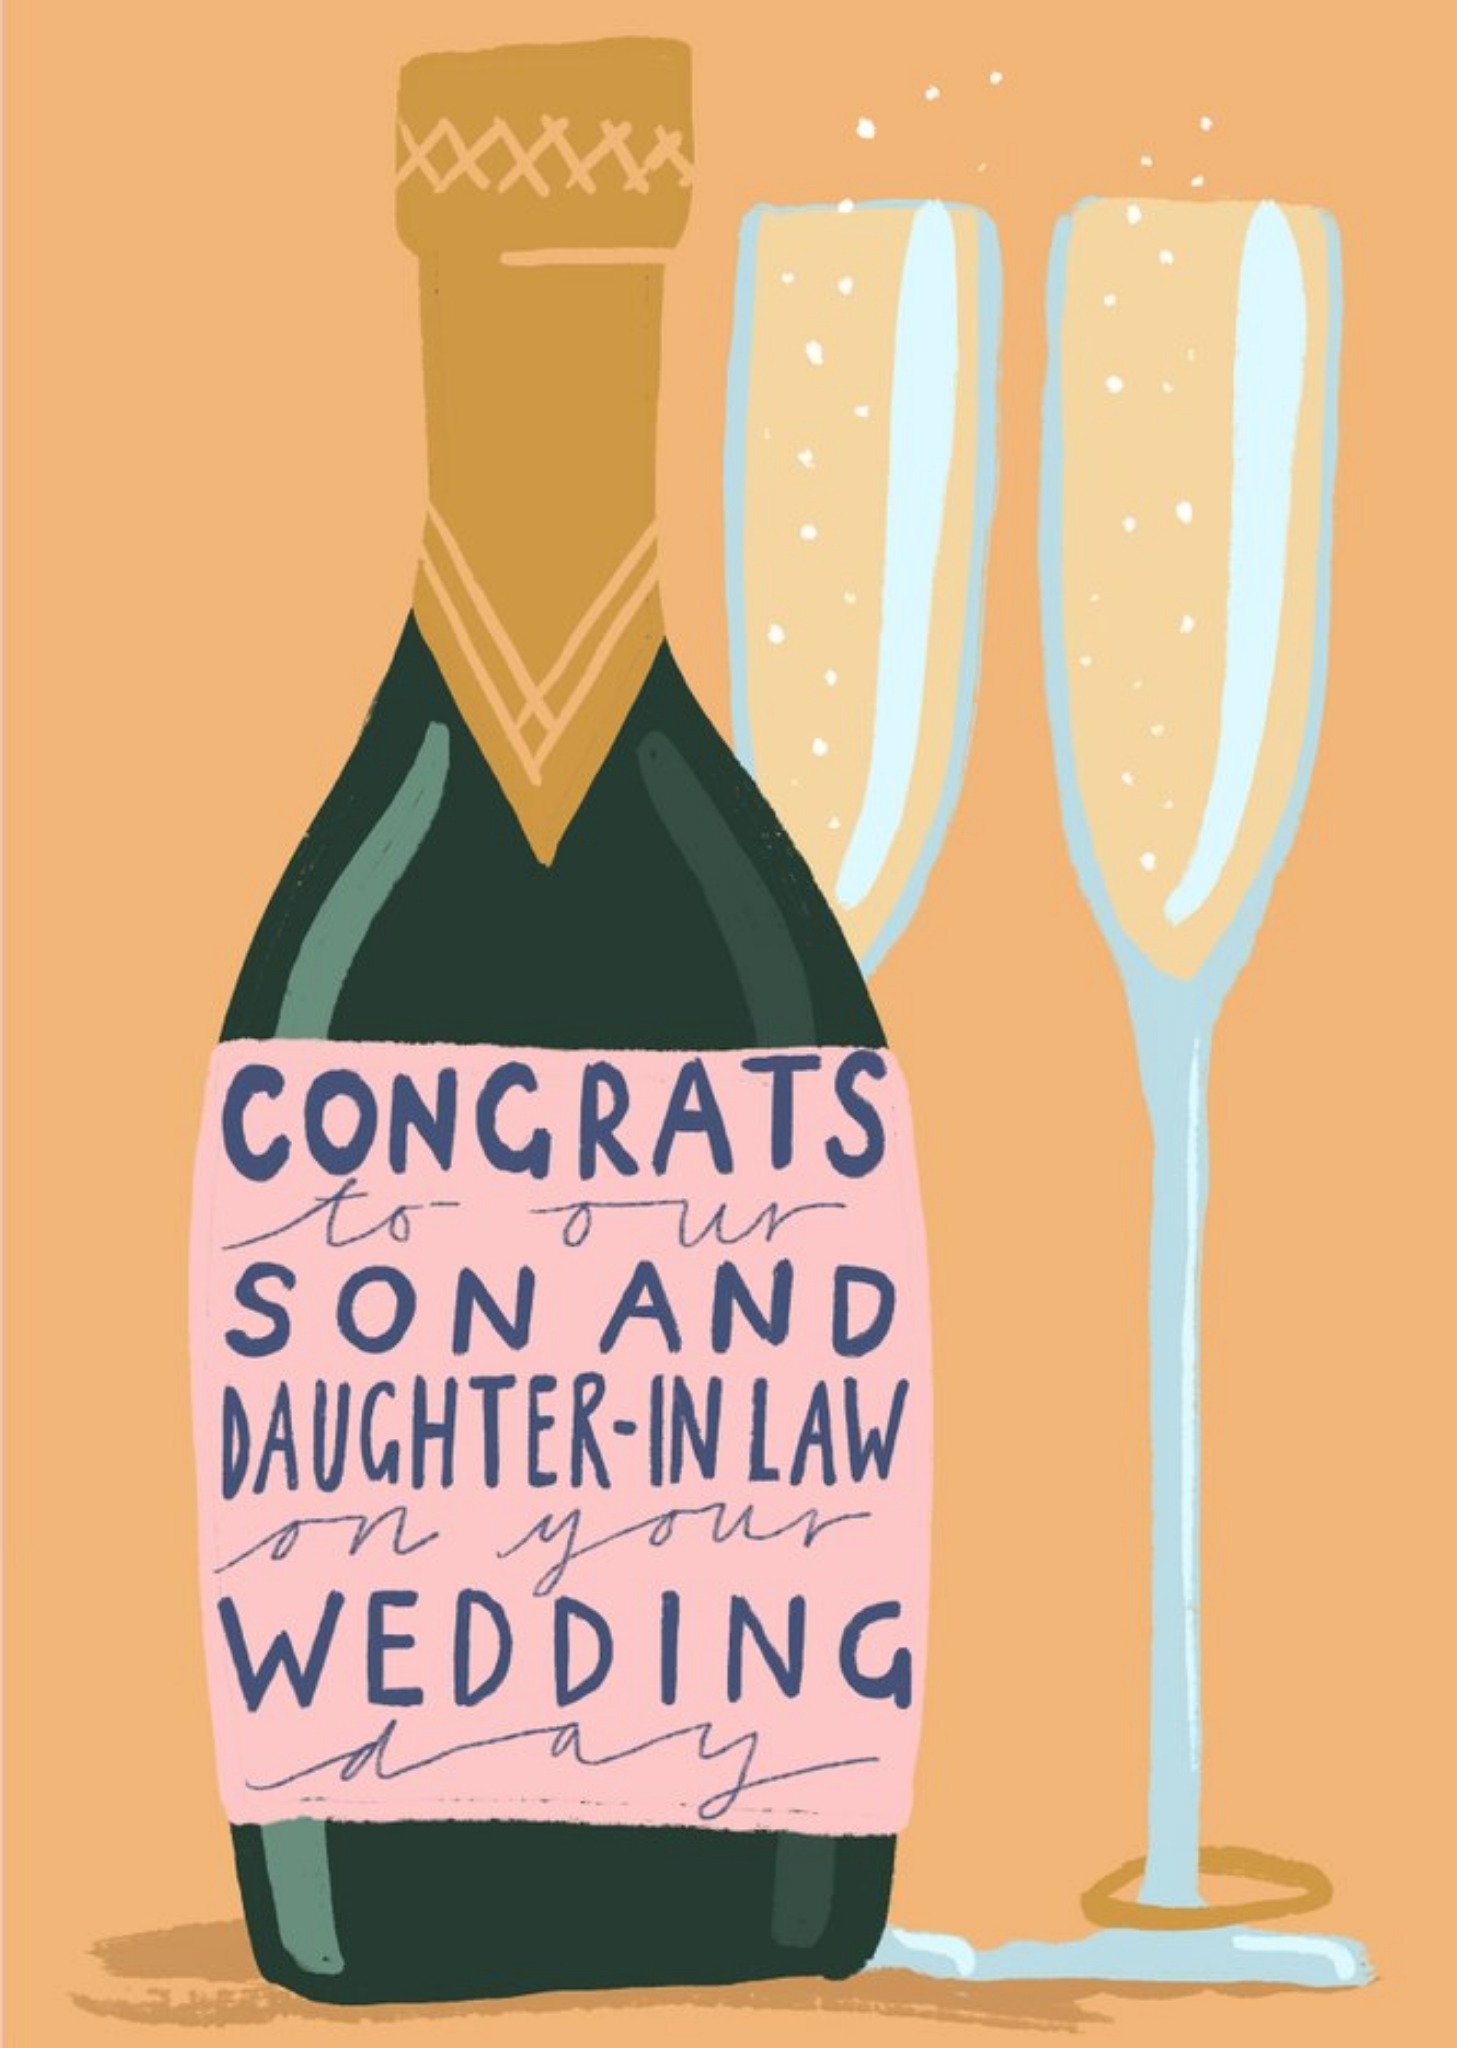 Moonpig Illustration Of Champagne Bottle And Glasses Congrats To Our Son And Daughter In Law On Your